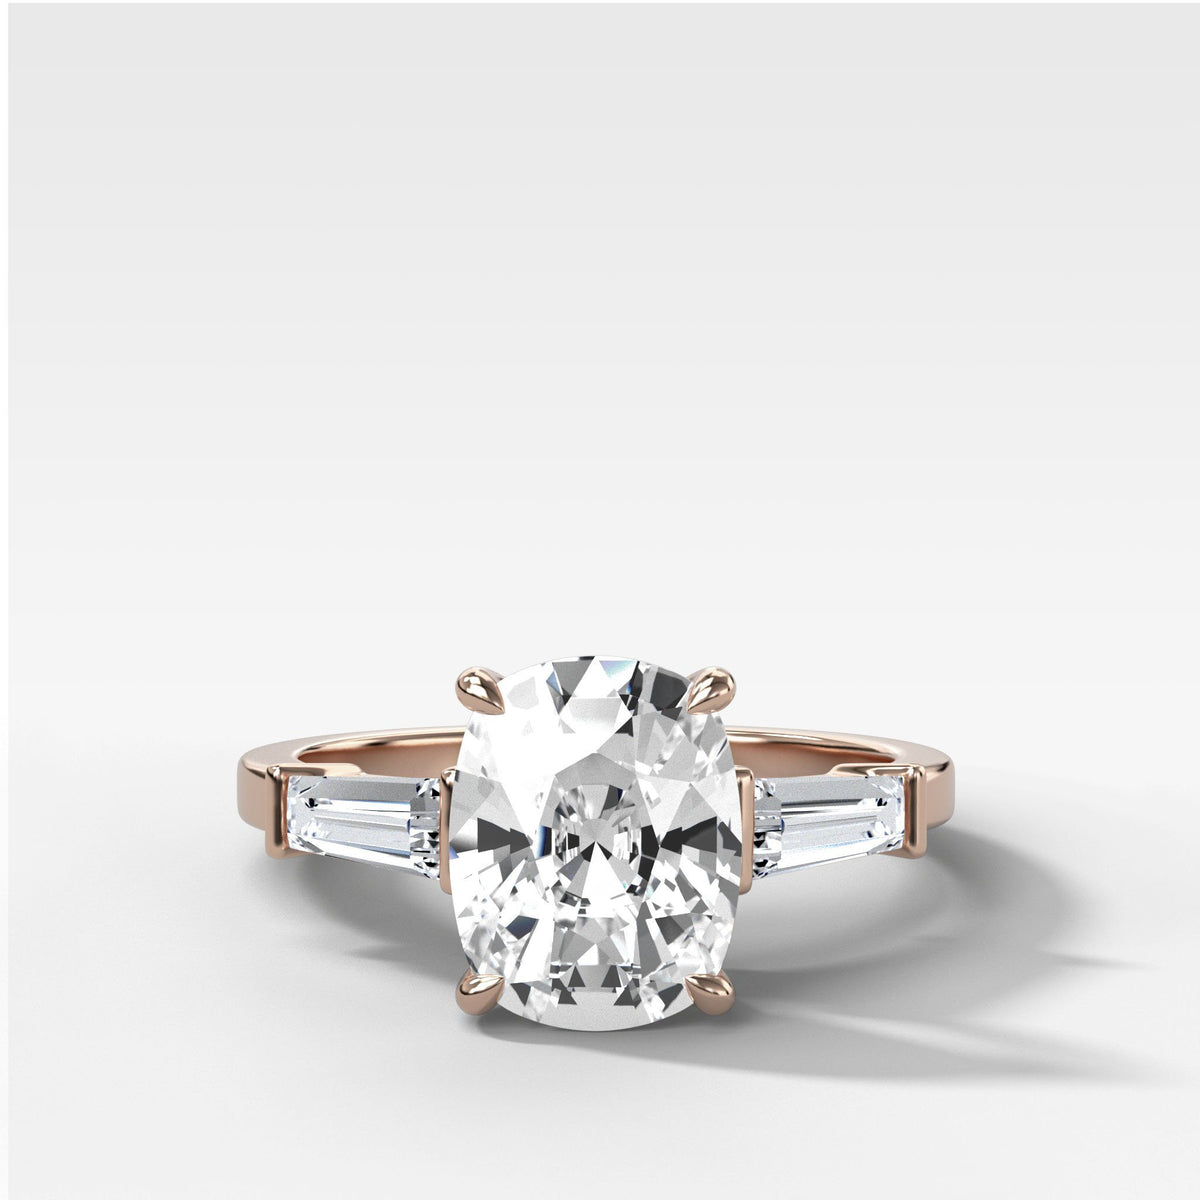 Translunar Tapered Baguette Engagement Ring With Elongated Cushion Cut by Good Stone in Rose Gold